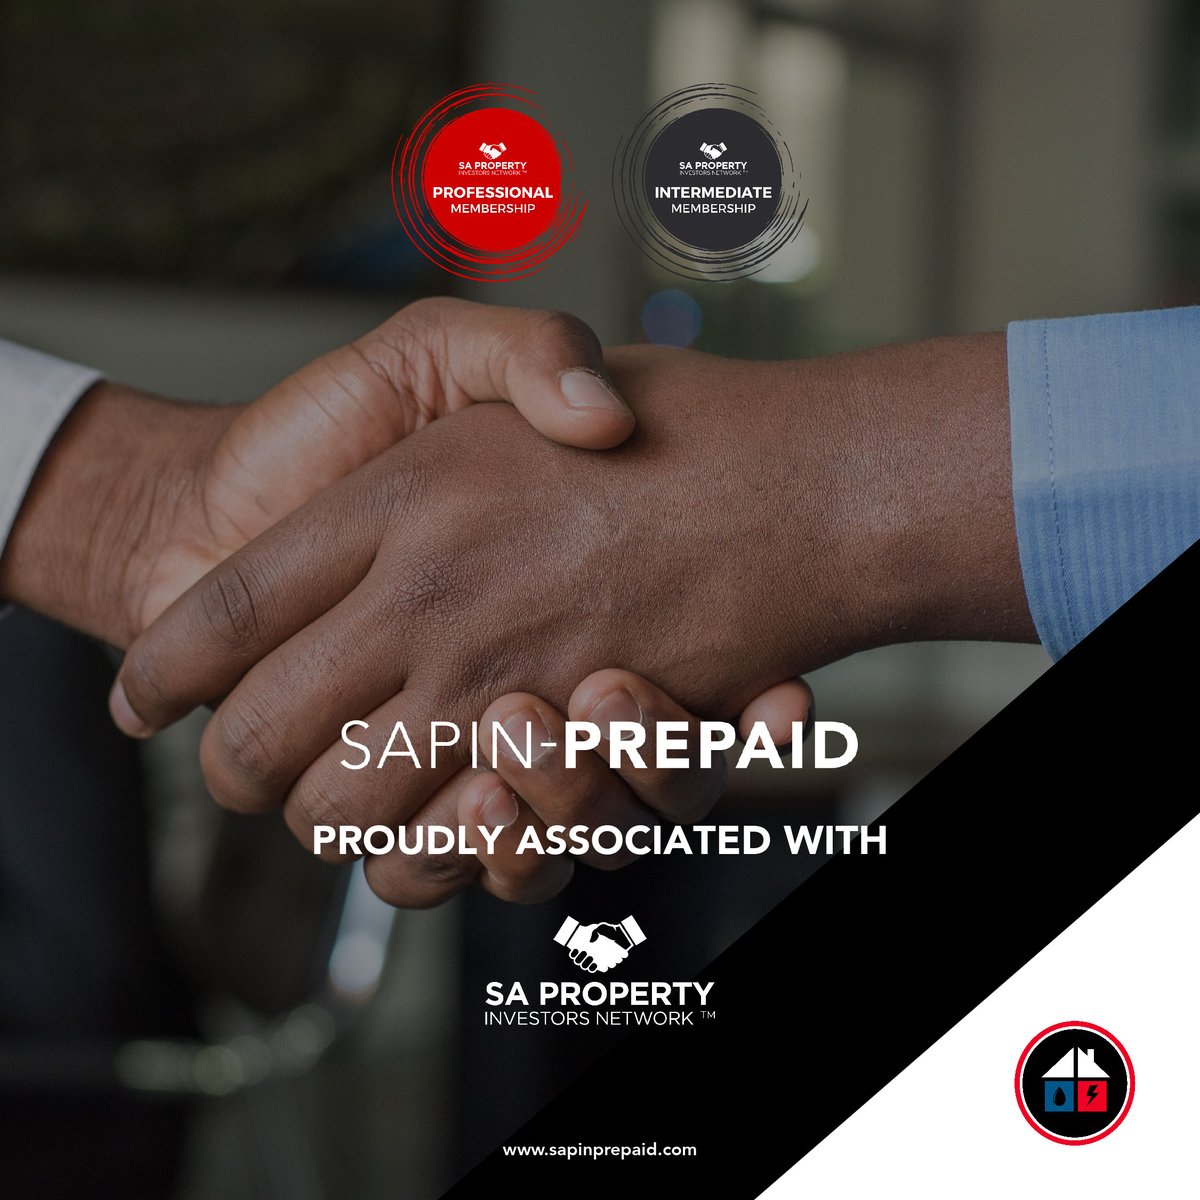 We are proudly associated with @sapropertynetwork and offer rewards for all Intermediate and Professional members, including cash back incentives.